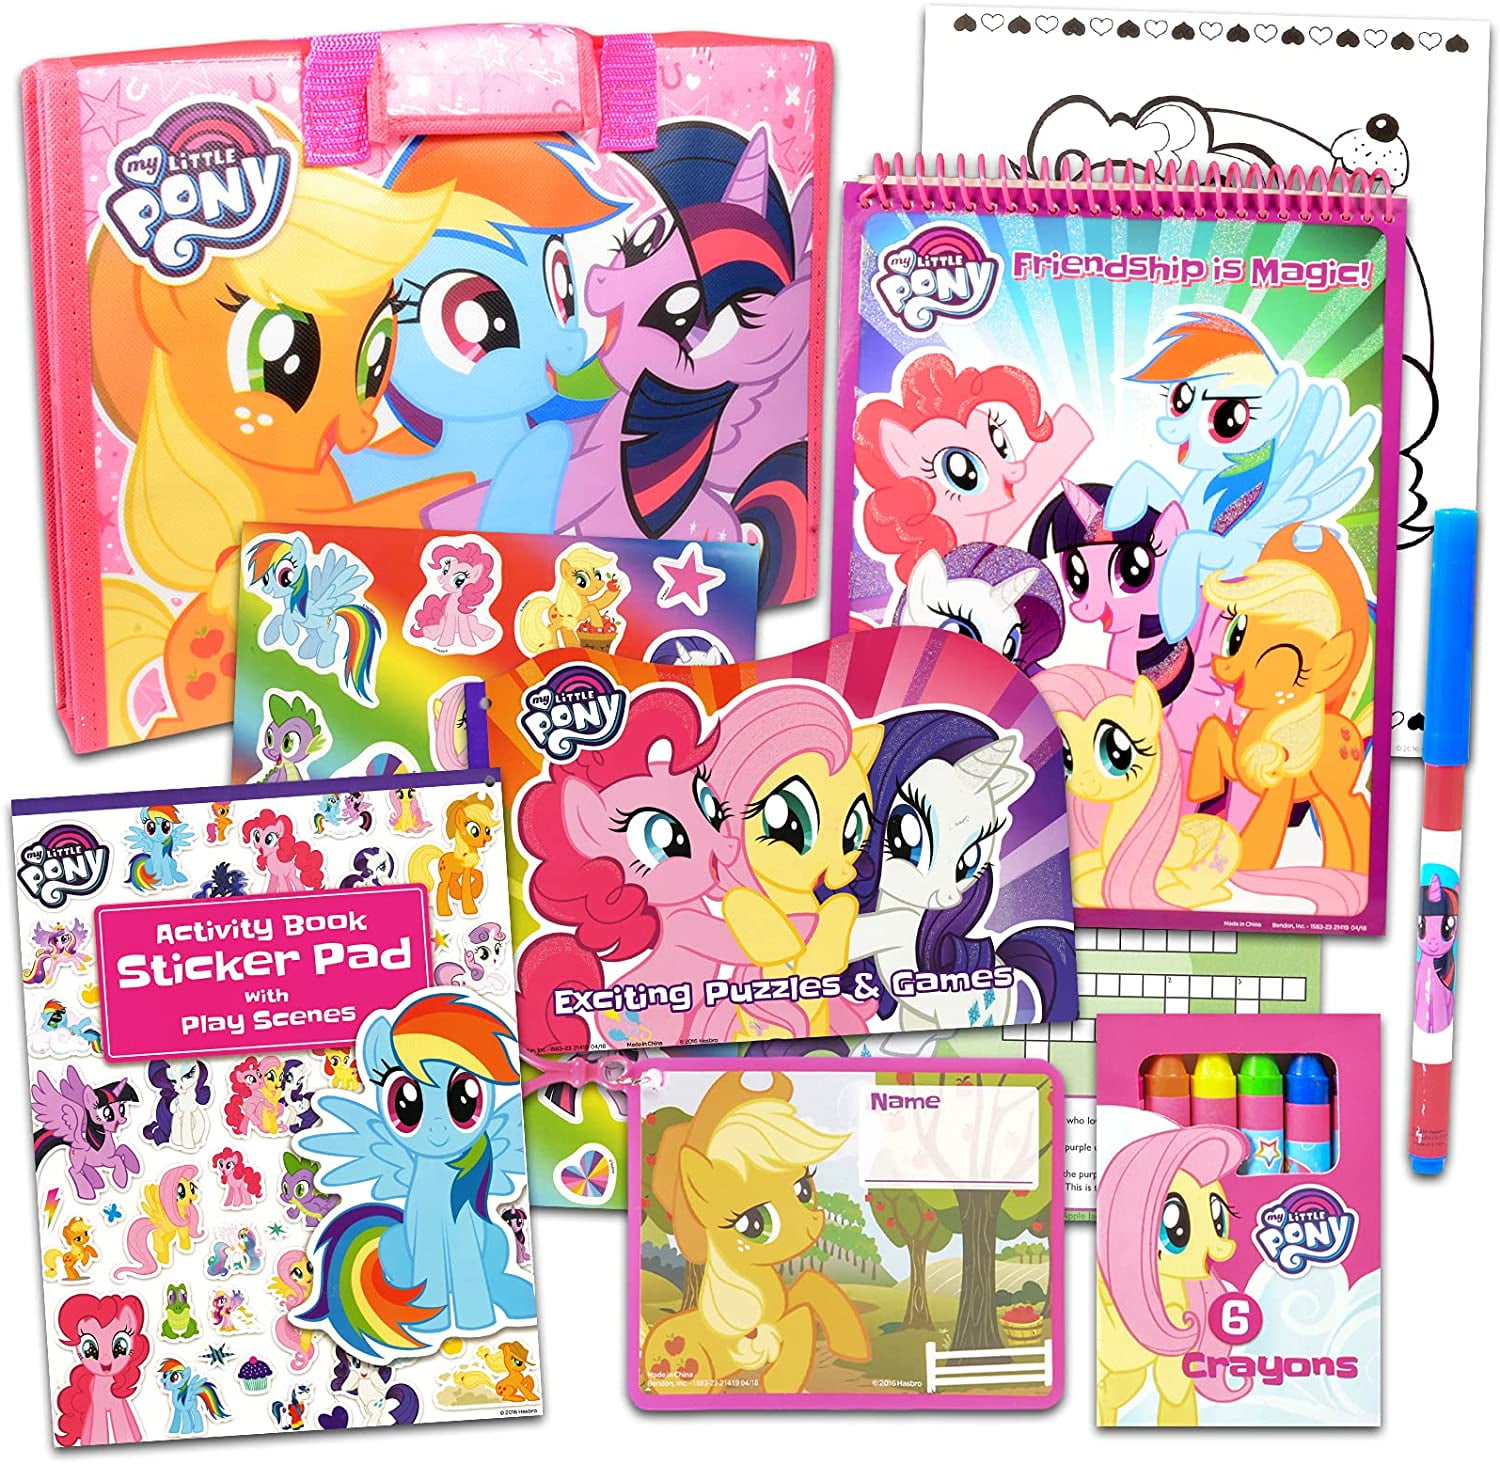 Boys Girls Kids My Little Pony ActiIvity Carry Case Pens Book Stencils FREE BOOK 